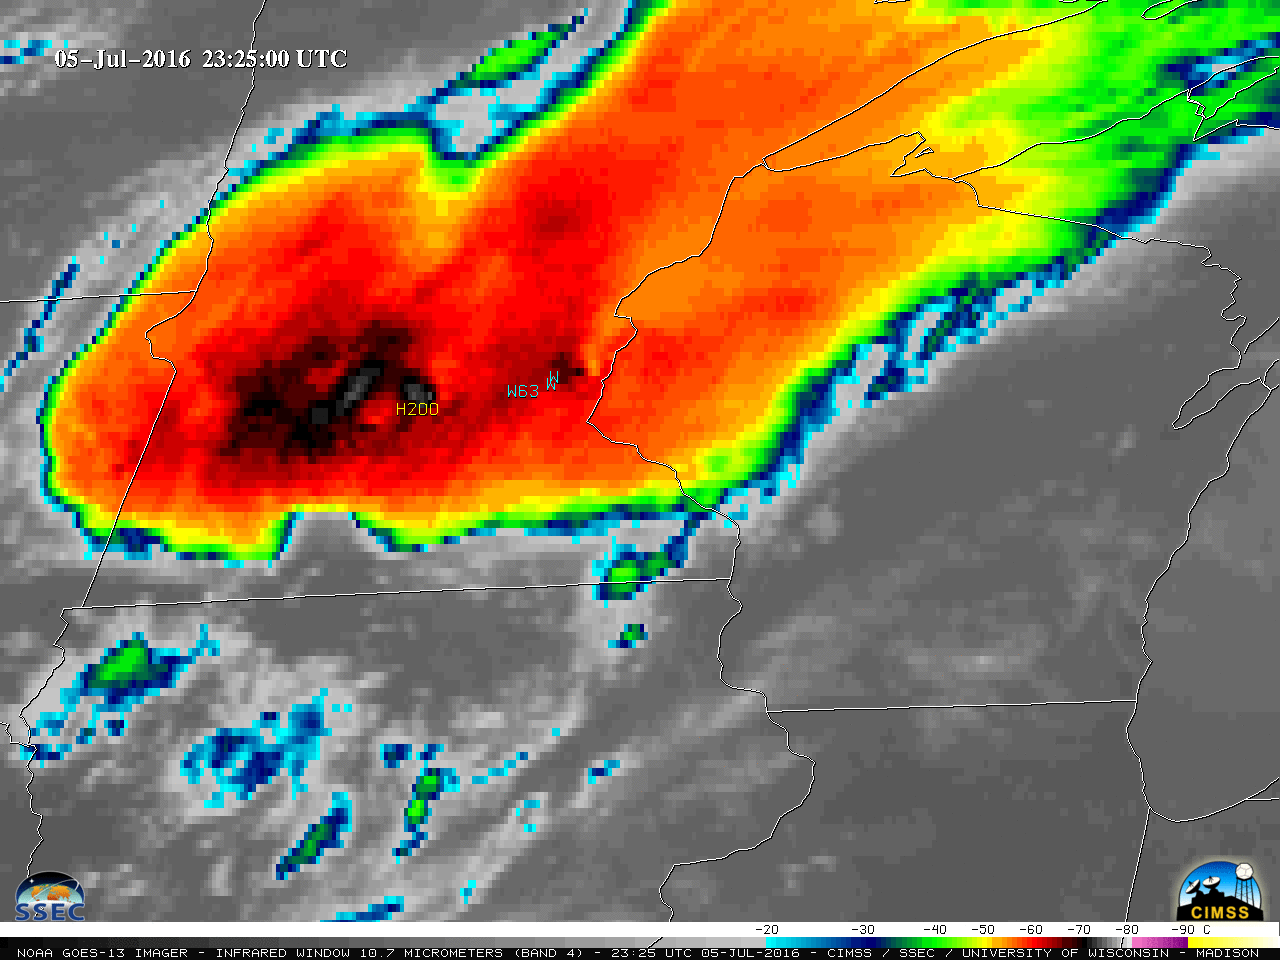 GOES-13 Infrared Window (10.7 um) images, with SPC storm reports [click to play animation]